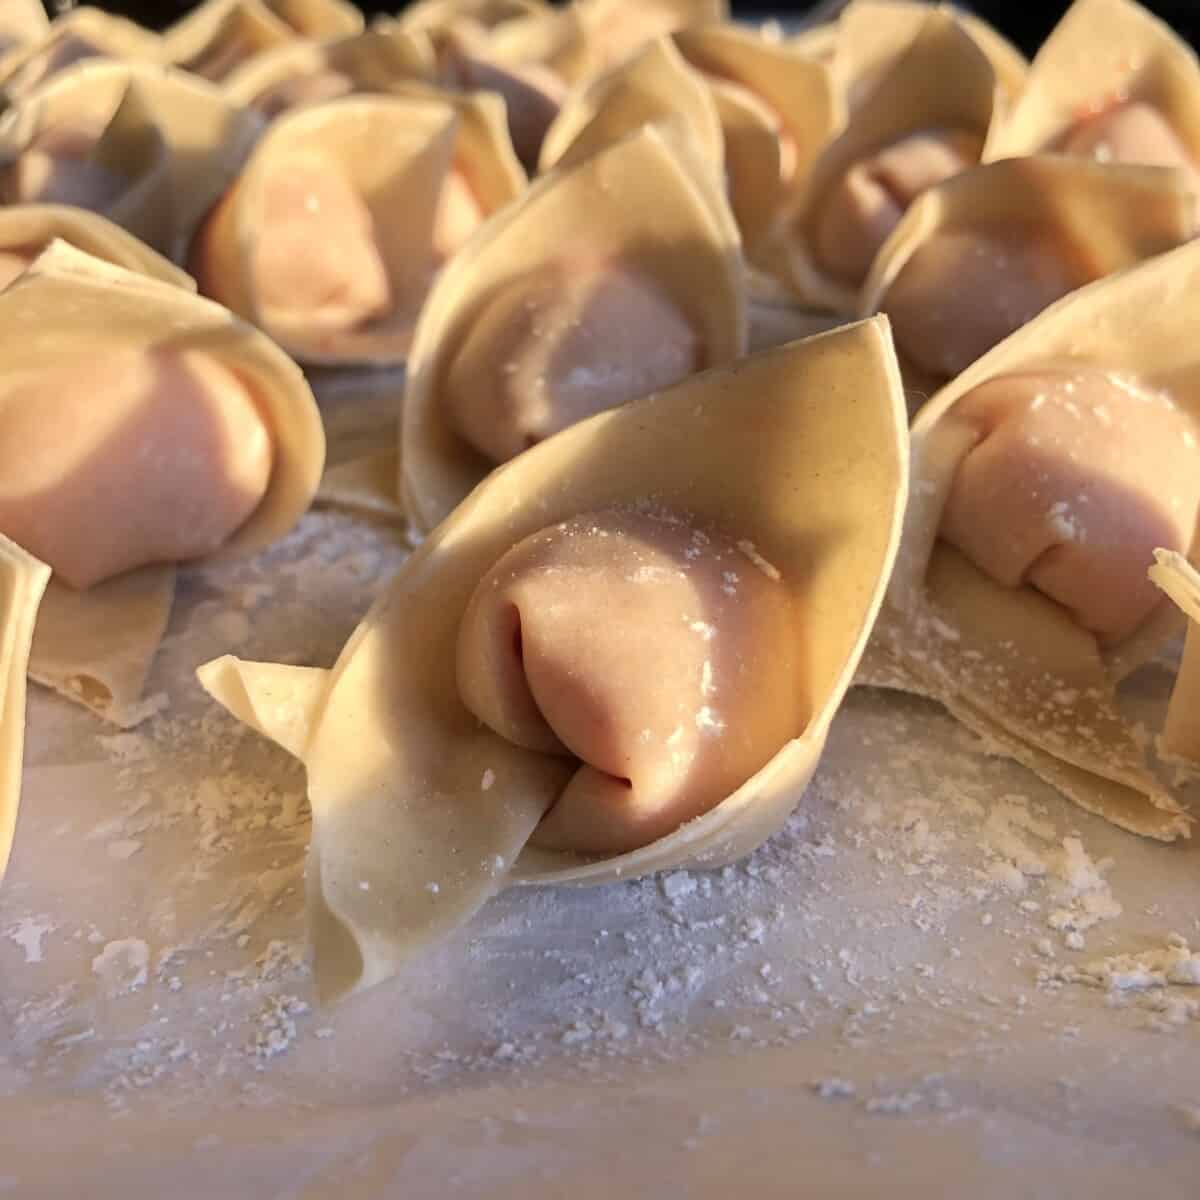 filled wontons ready to be boiled or frozen